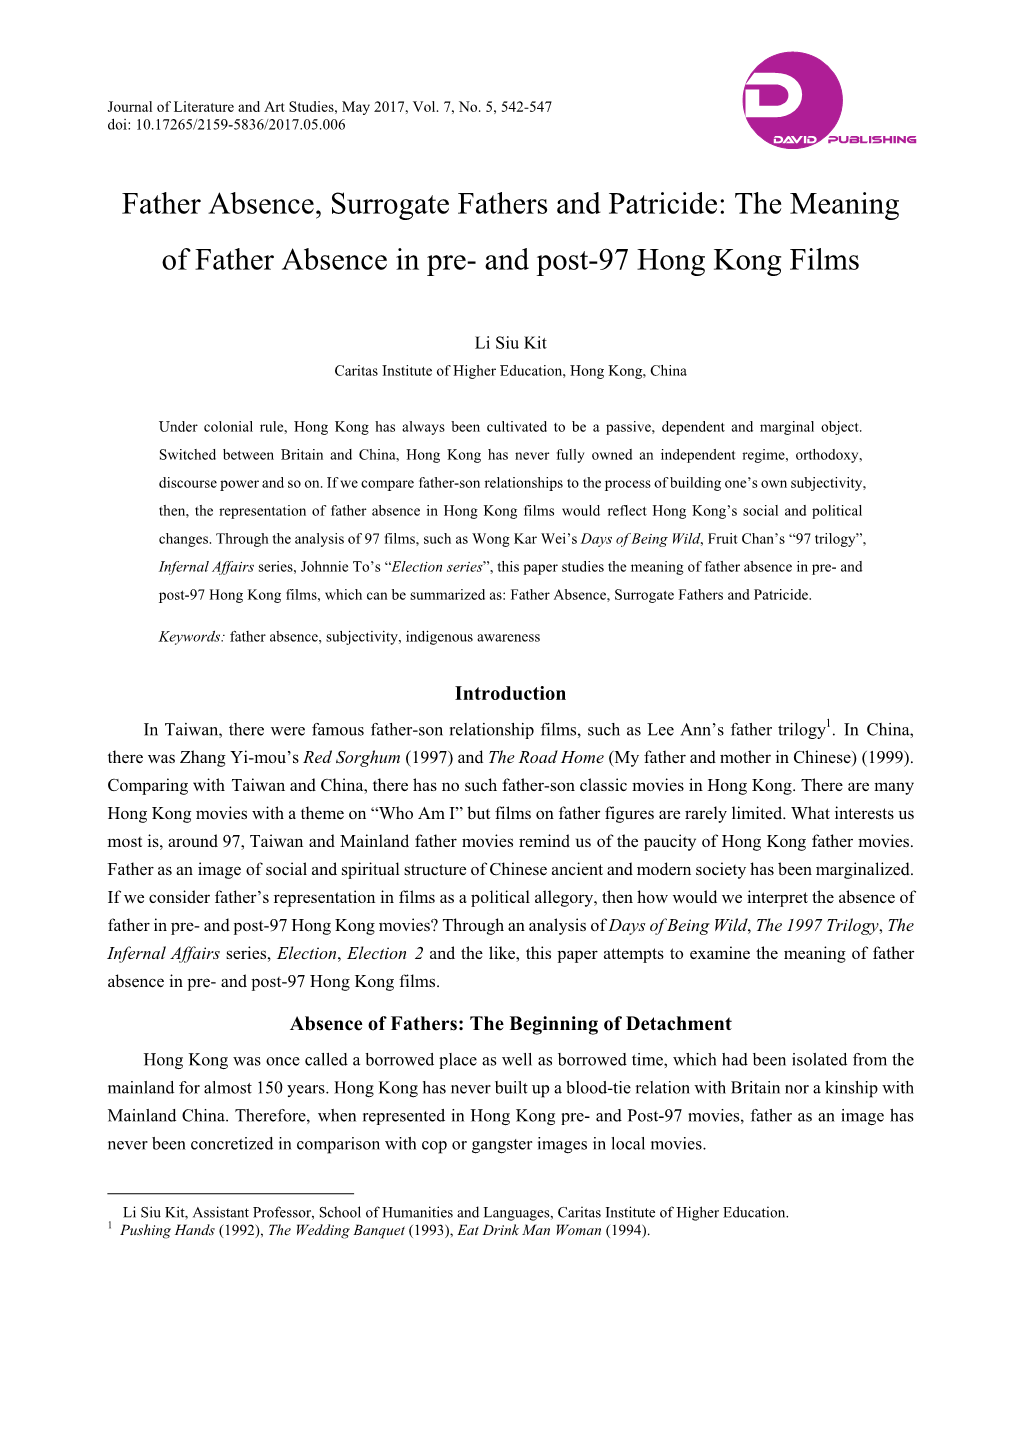 Father Absence, Surrogate Fathers and Patricide: the Meaning of Father Absence in Pre- and Post-97 Hong Kong Films